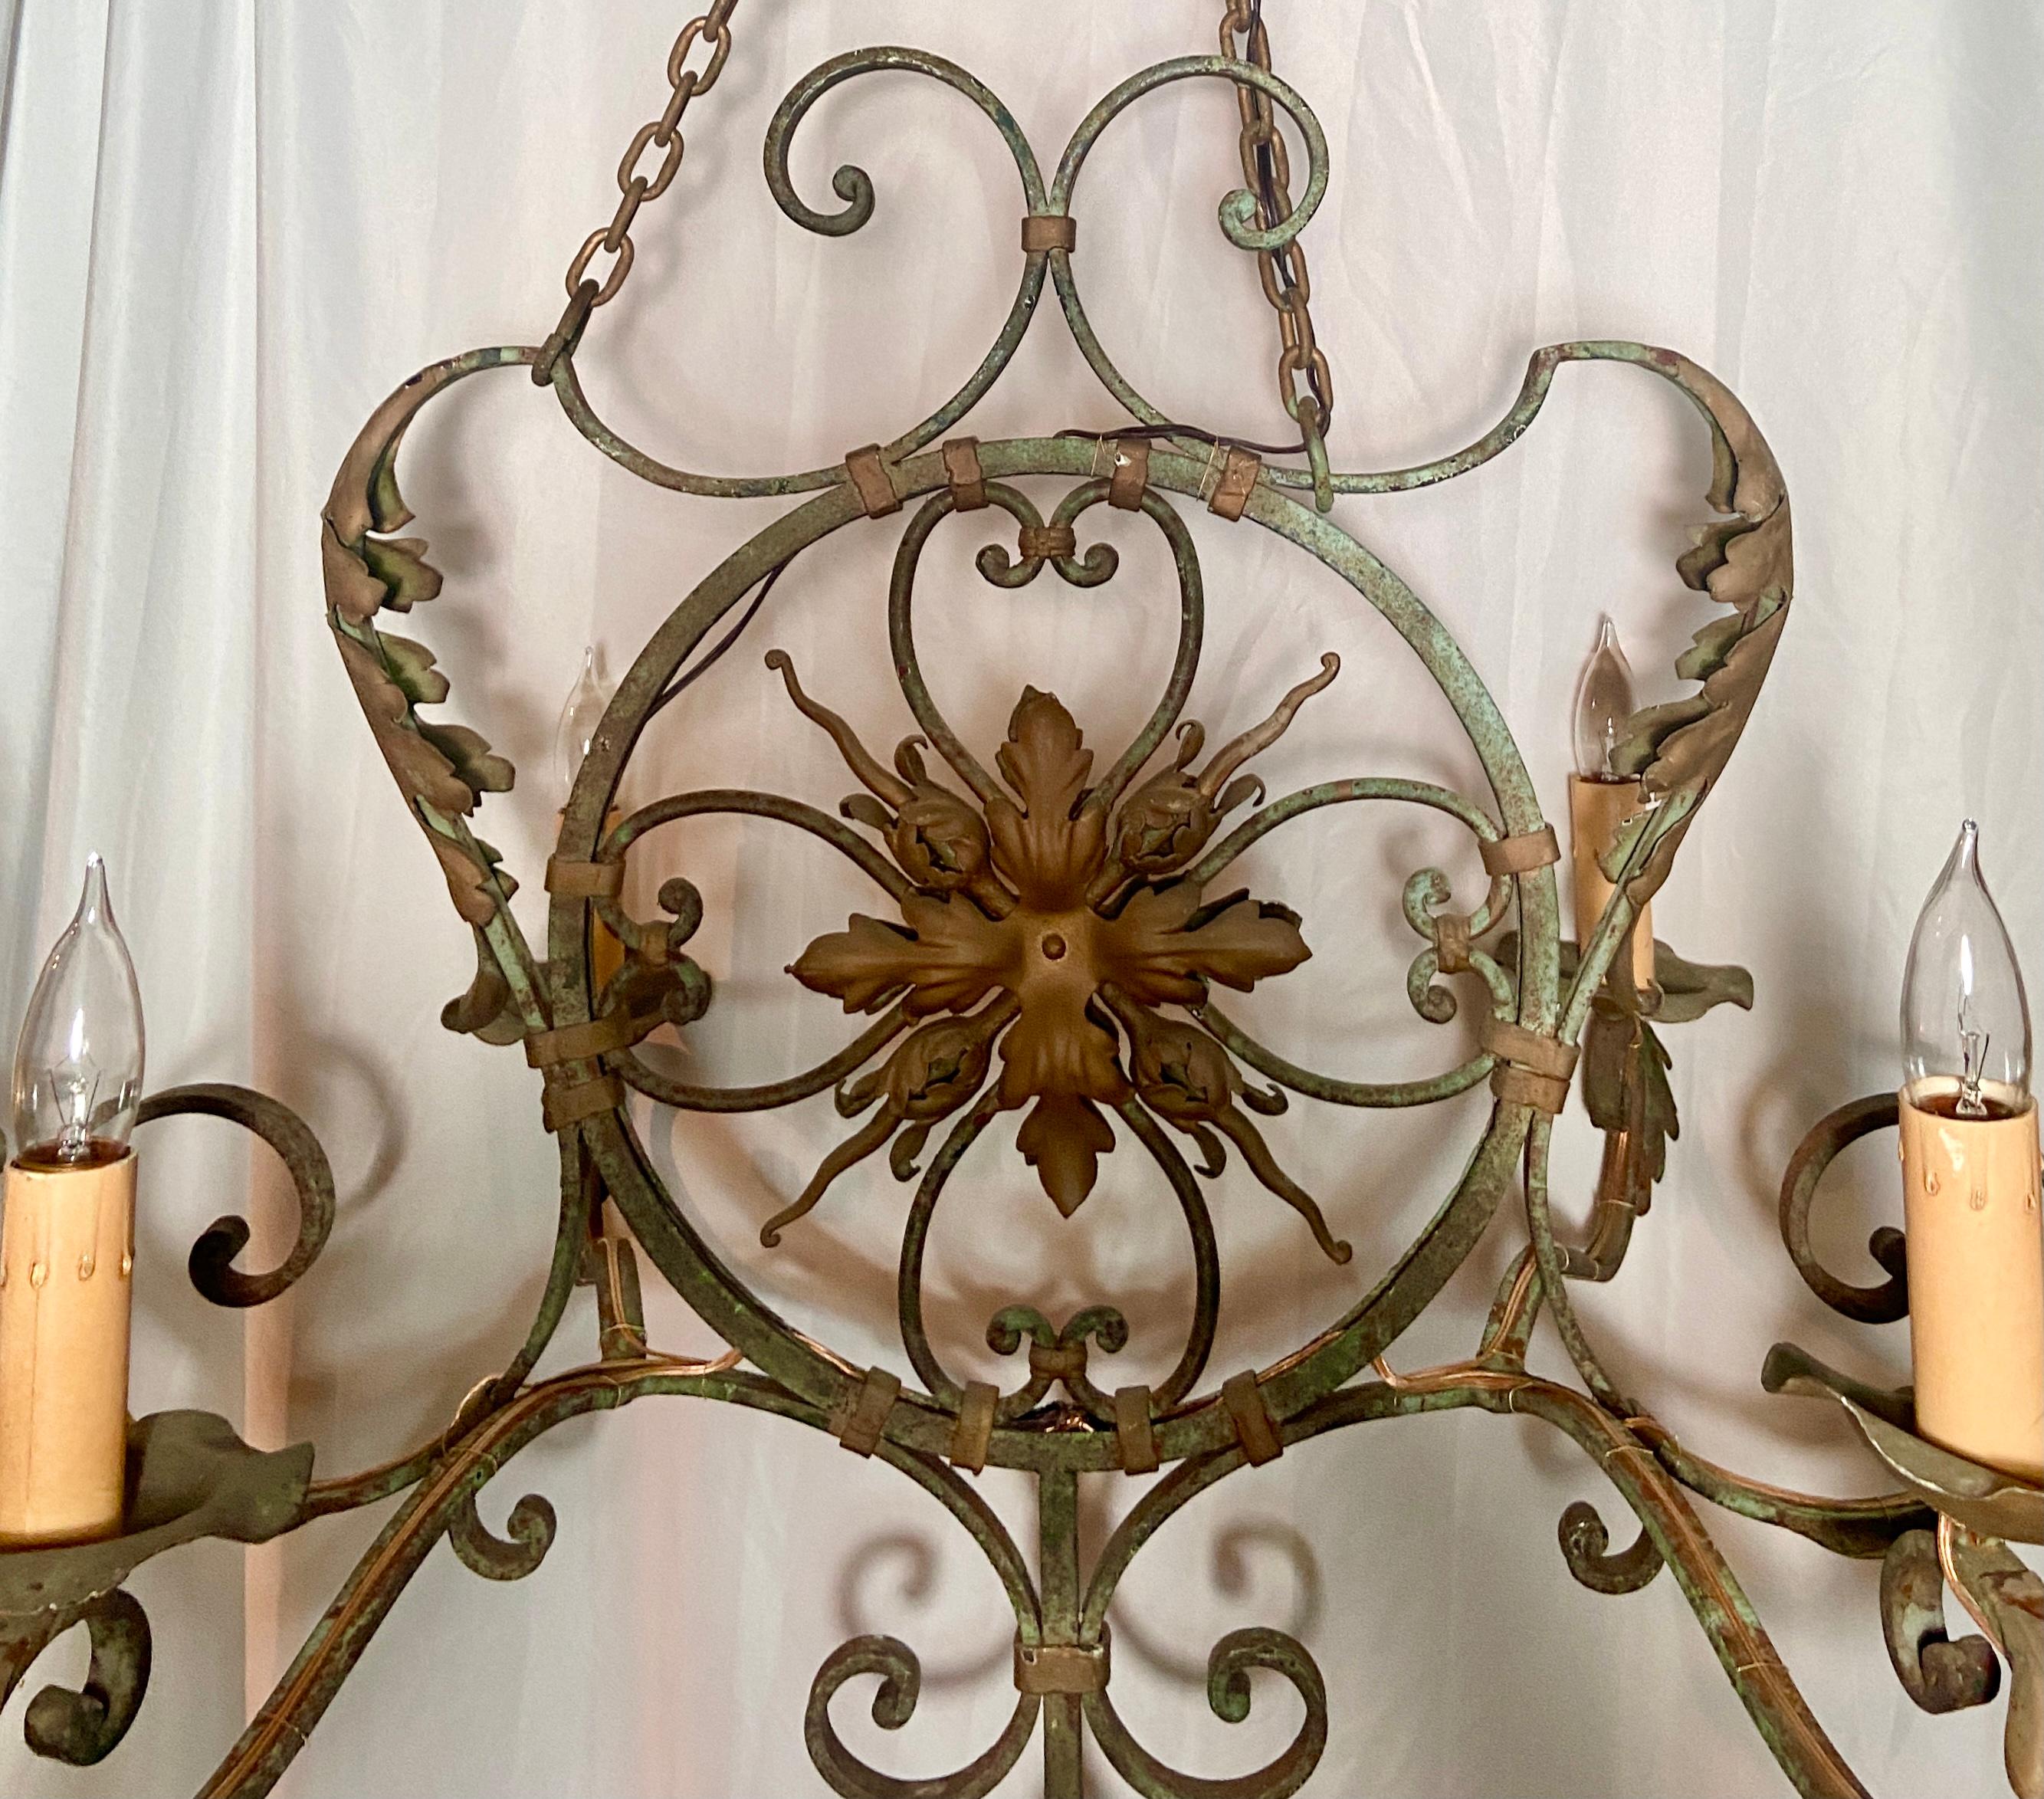 Antique 19th century French wrought iron 6 light chandelier.